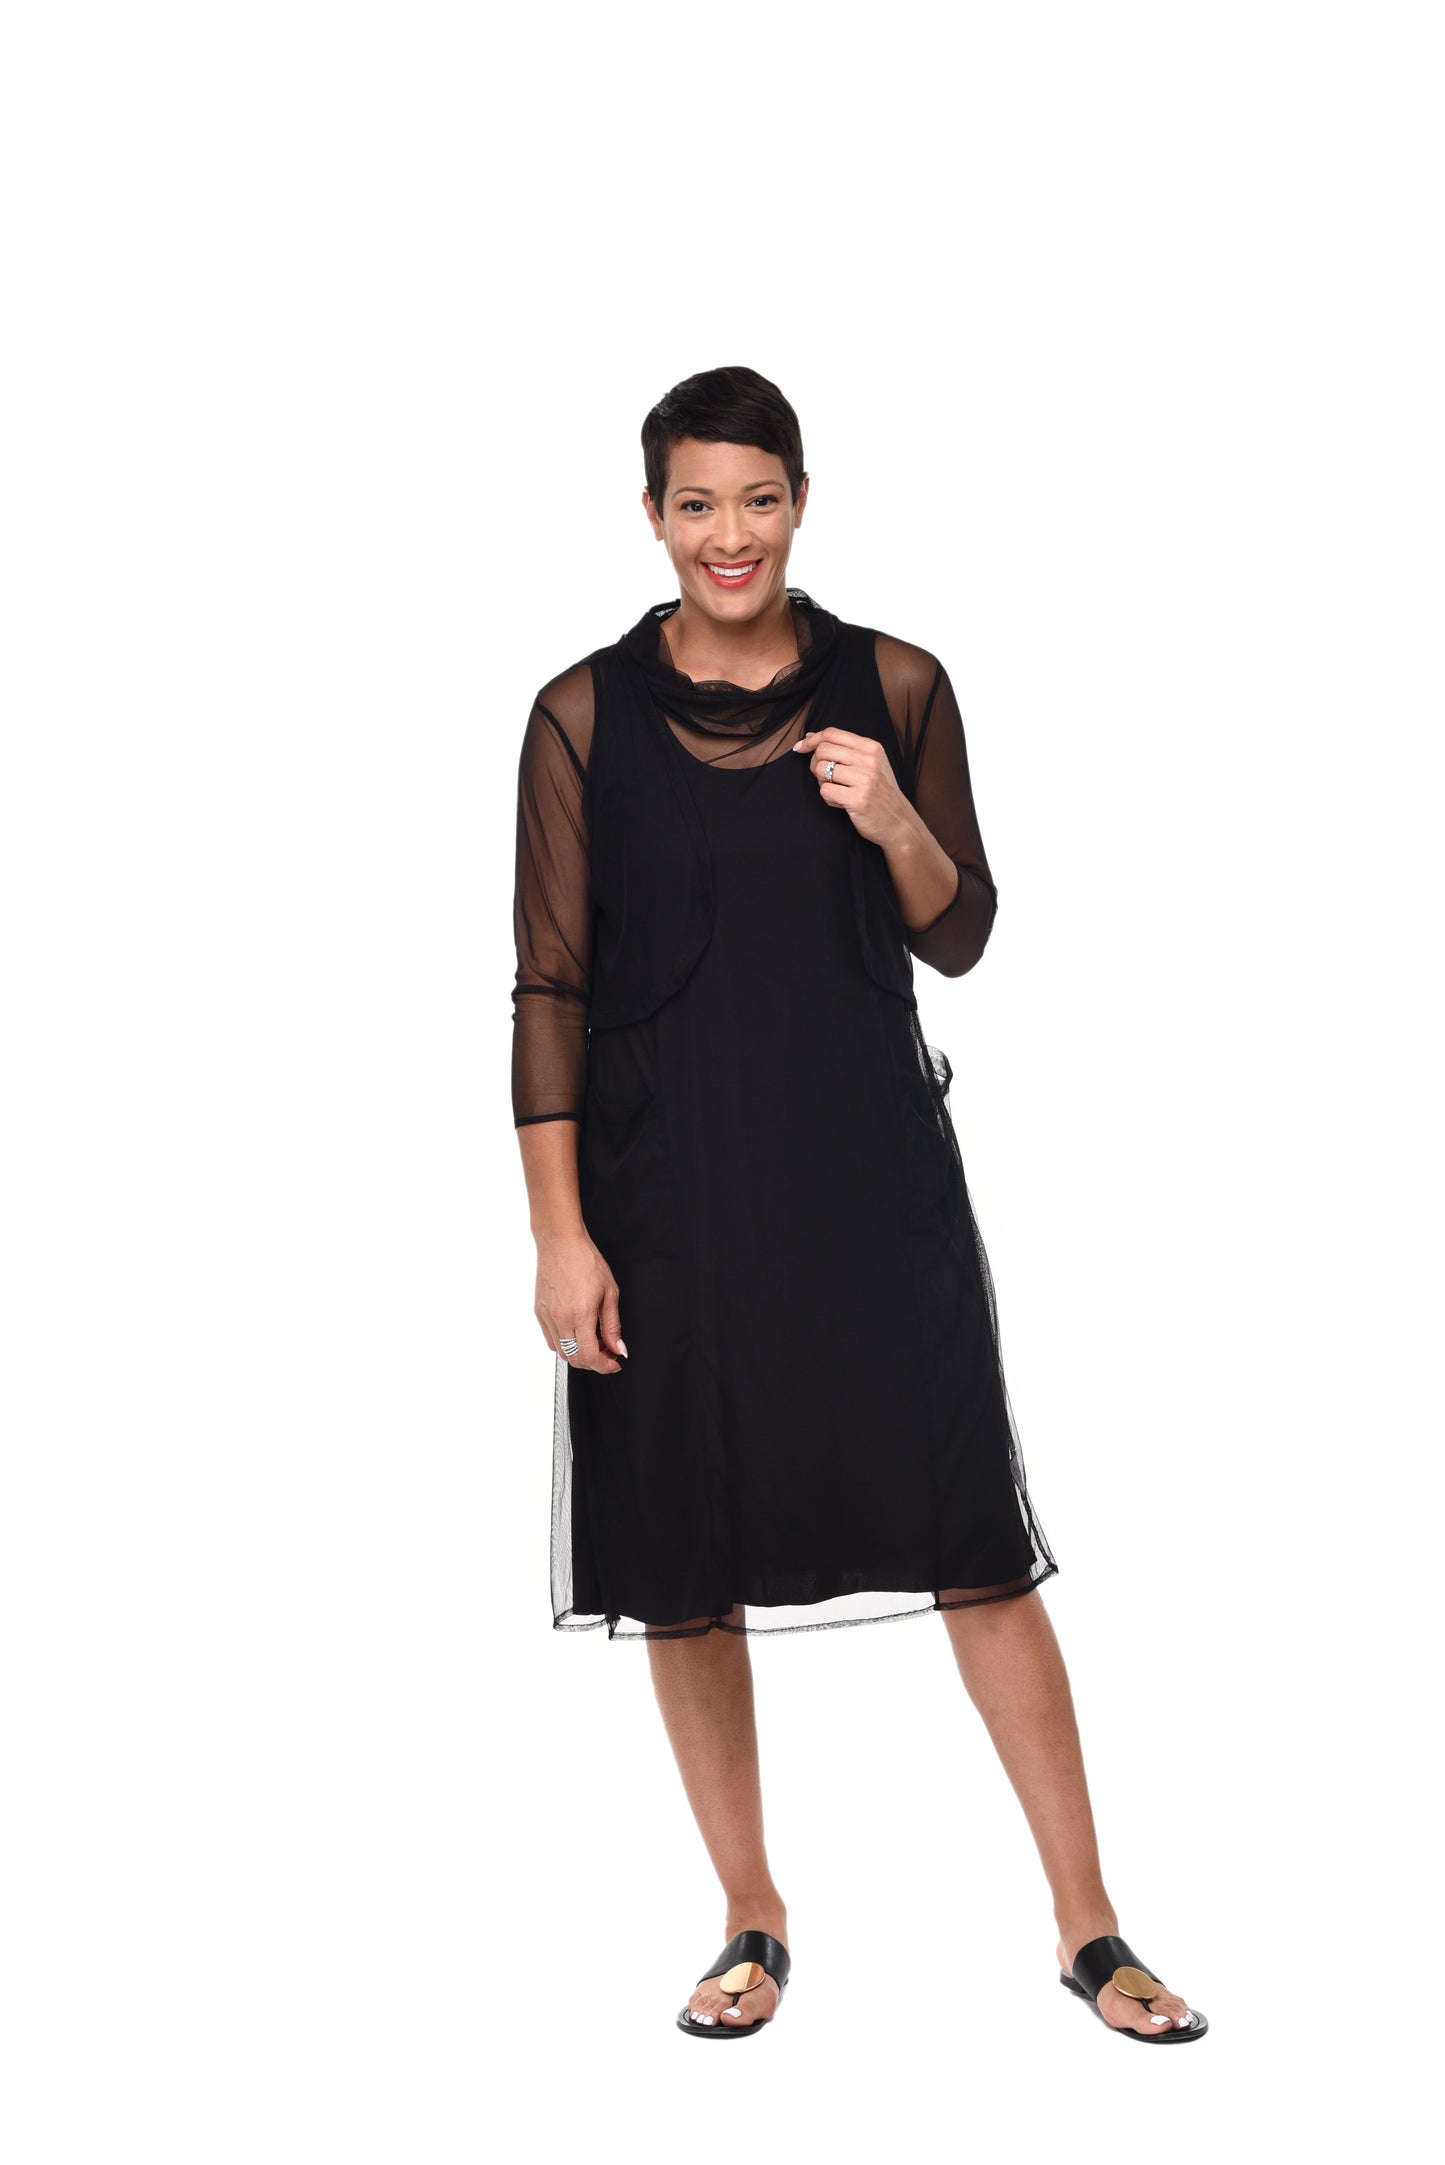 M204 Mazlyn Dress in Black with Liner*